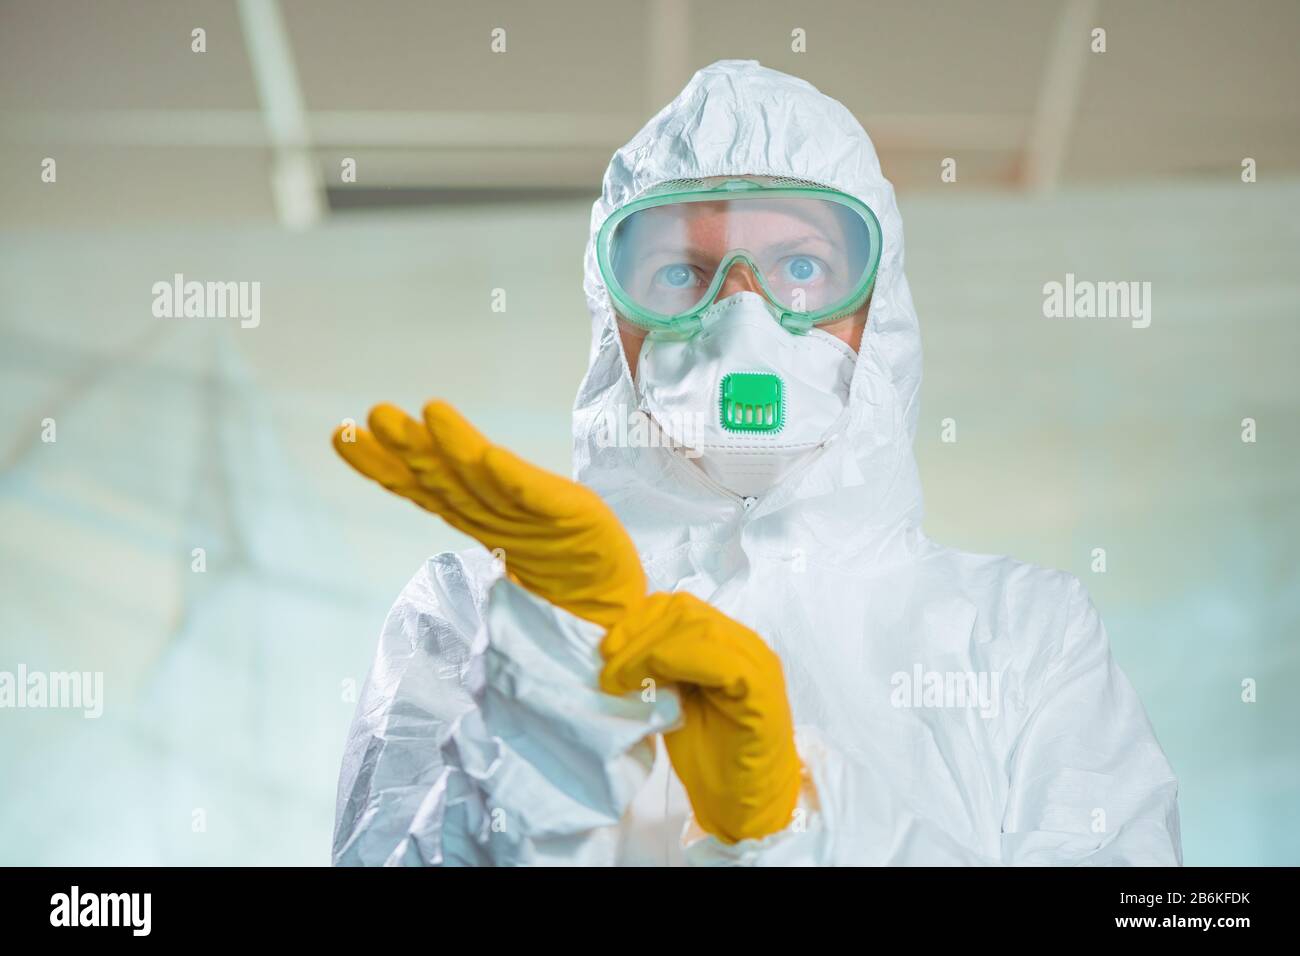 Portrait of female epidemiologist in virus quarantine, tight close up headshot of medical professional in protective clothing overalls Stock Photo